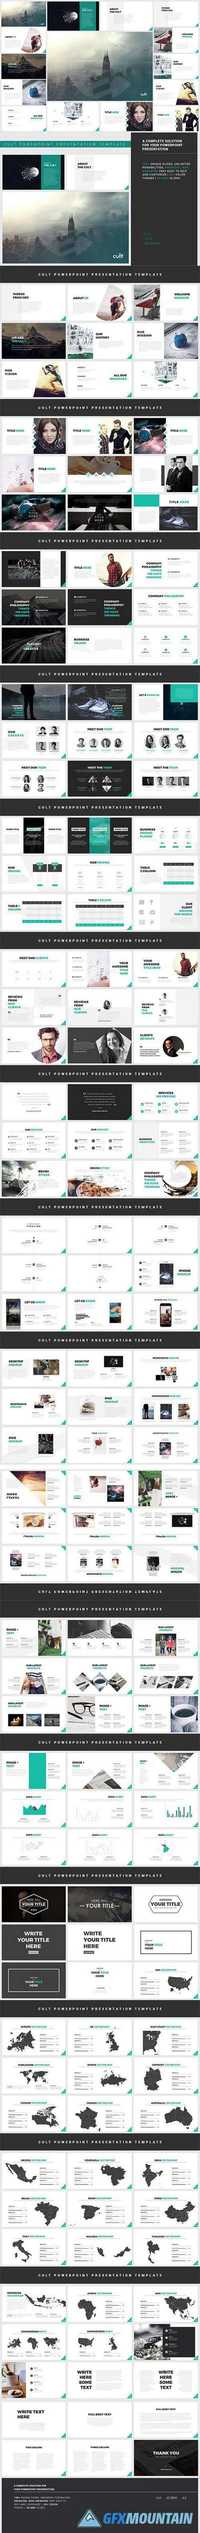 Powerpoint Template - Cult 917811